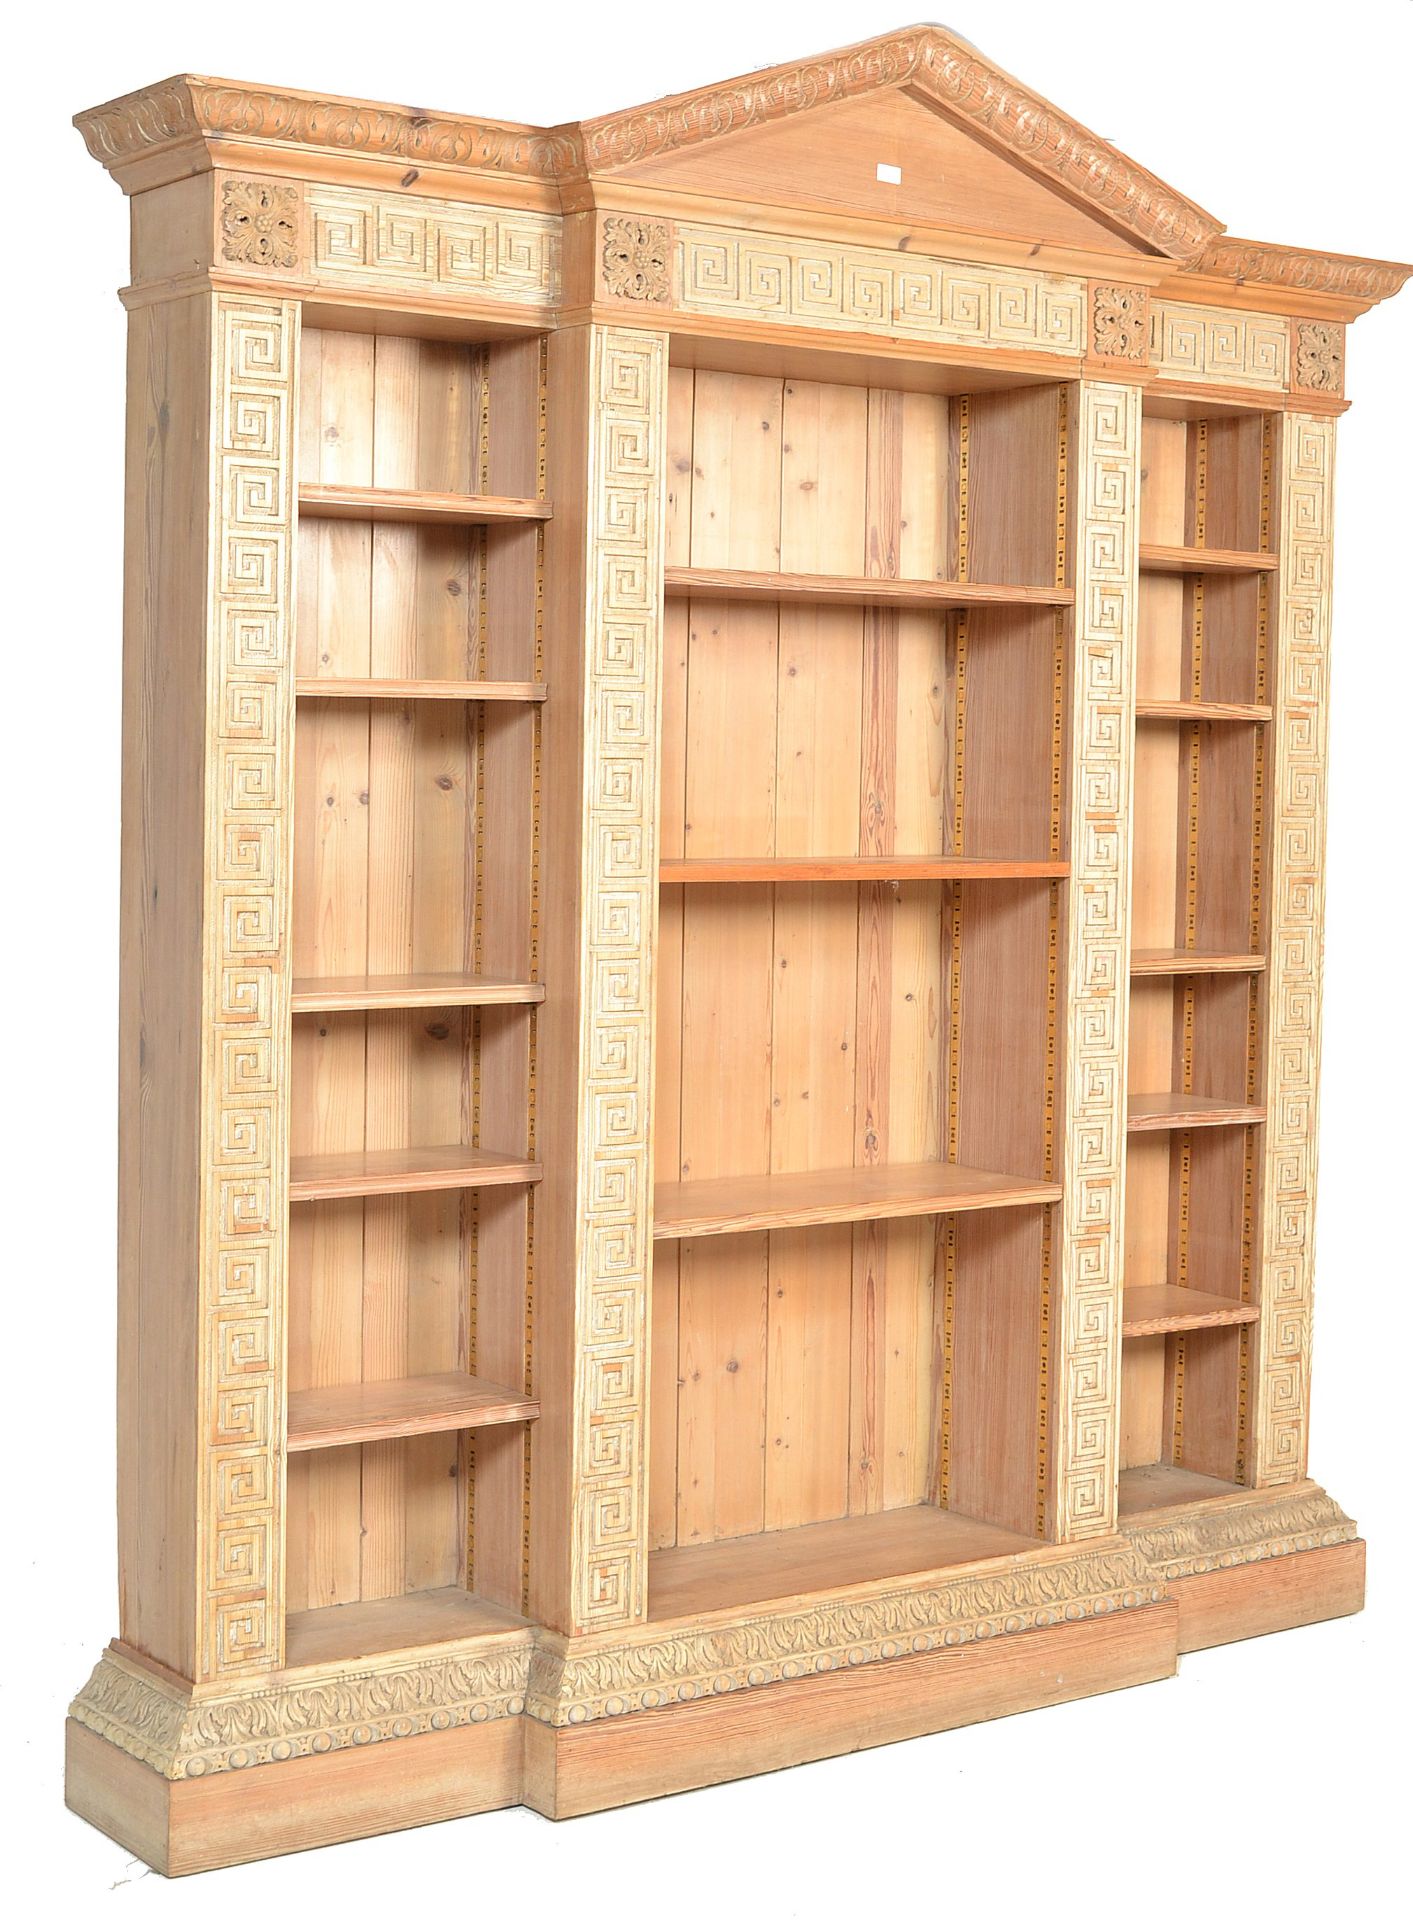 LARGE TRIPLE OPEN BREAKFRONT BOOKCASE AND SHELVES.